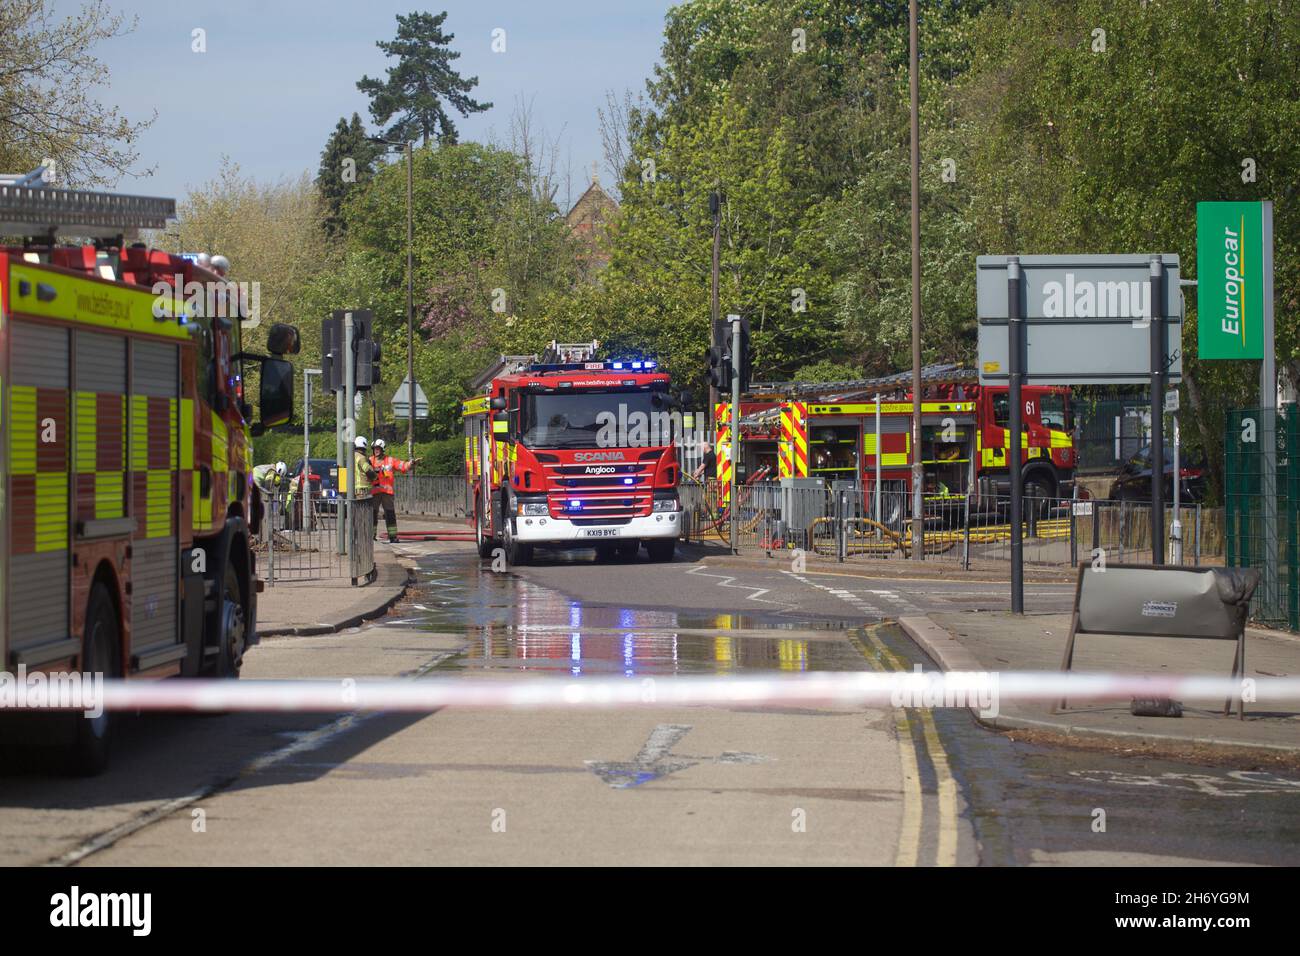 Fire engines in the street Stock Photo